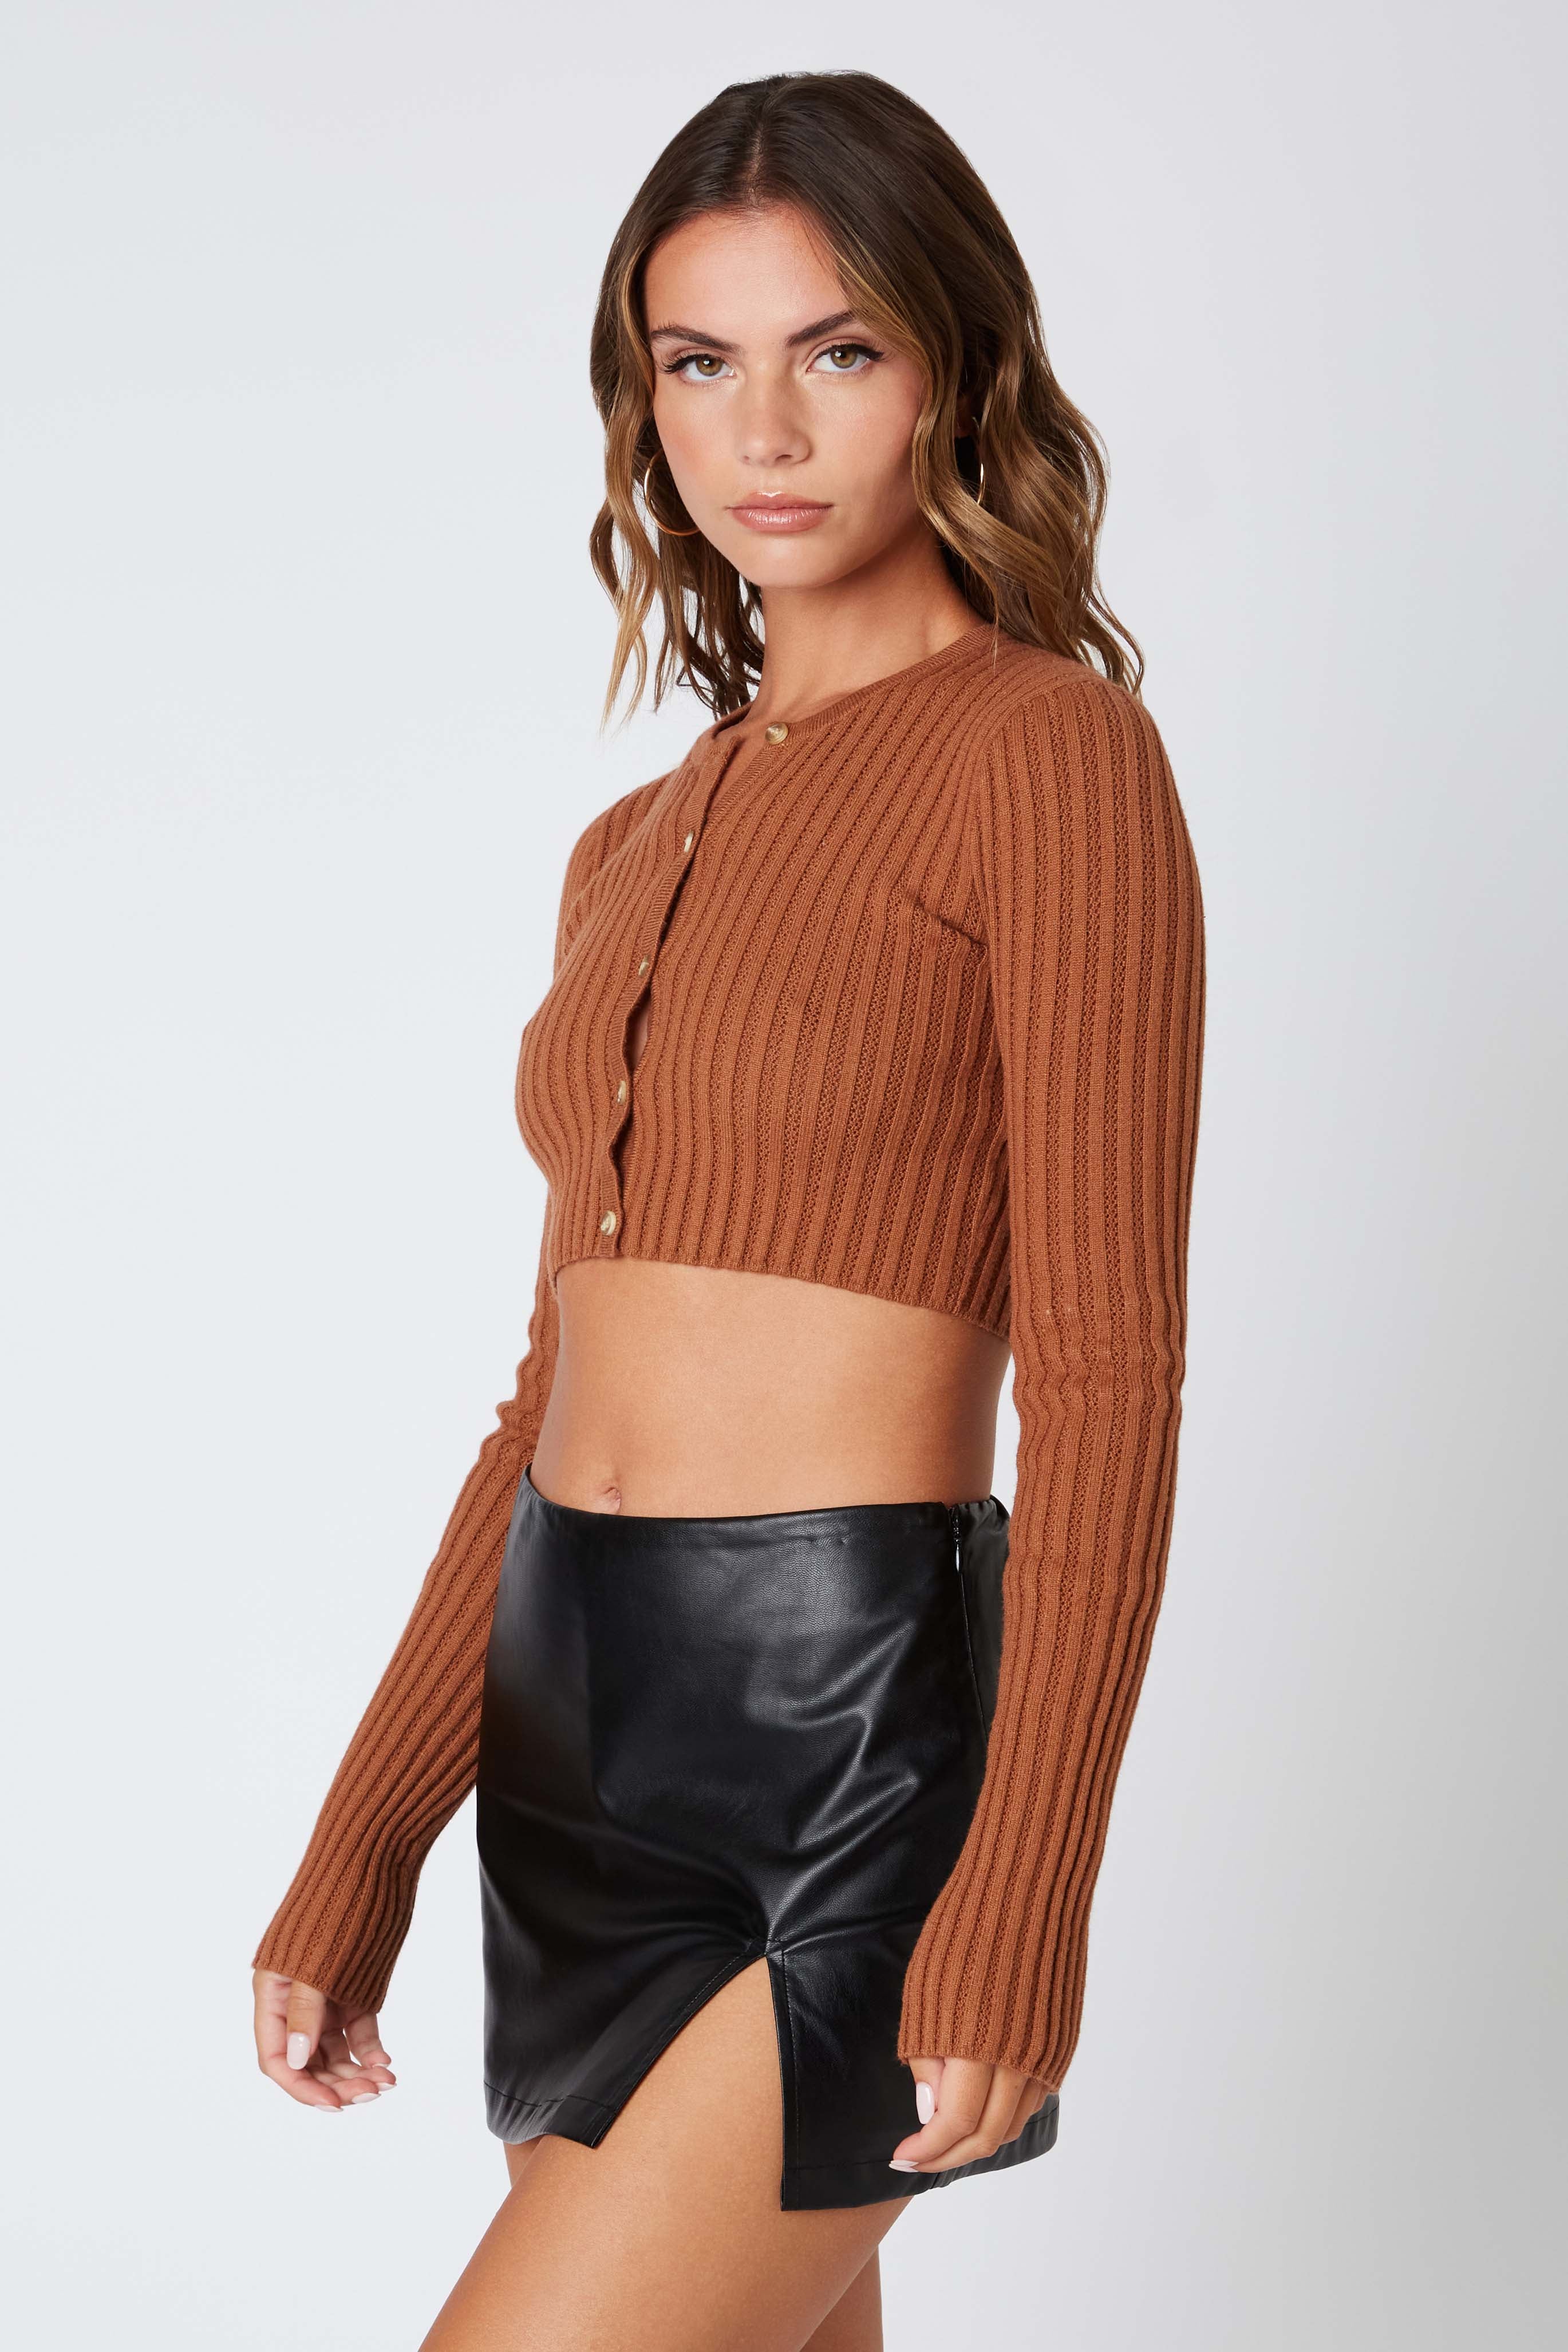 Cropped Cardigan in Bronze Side View